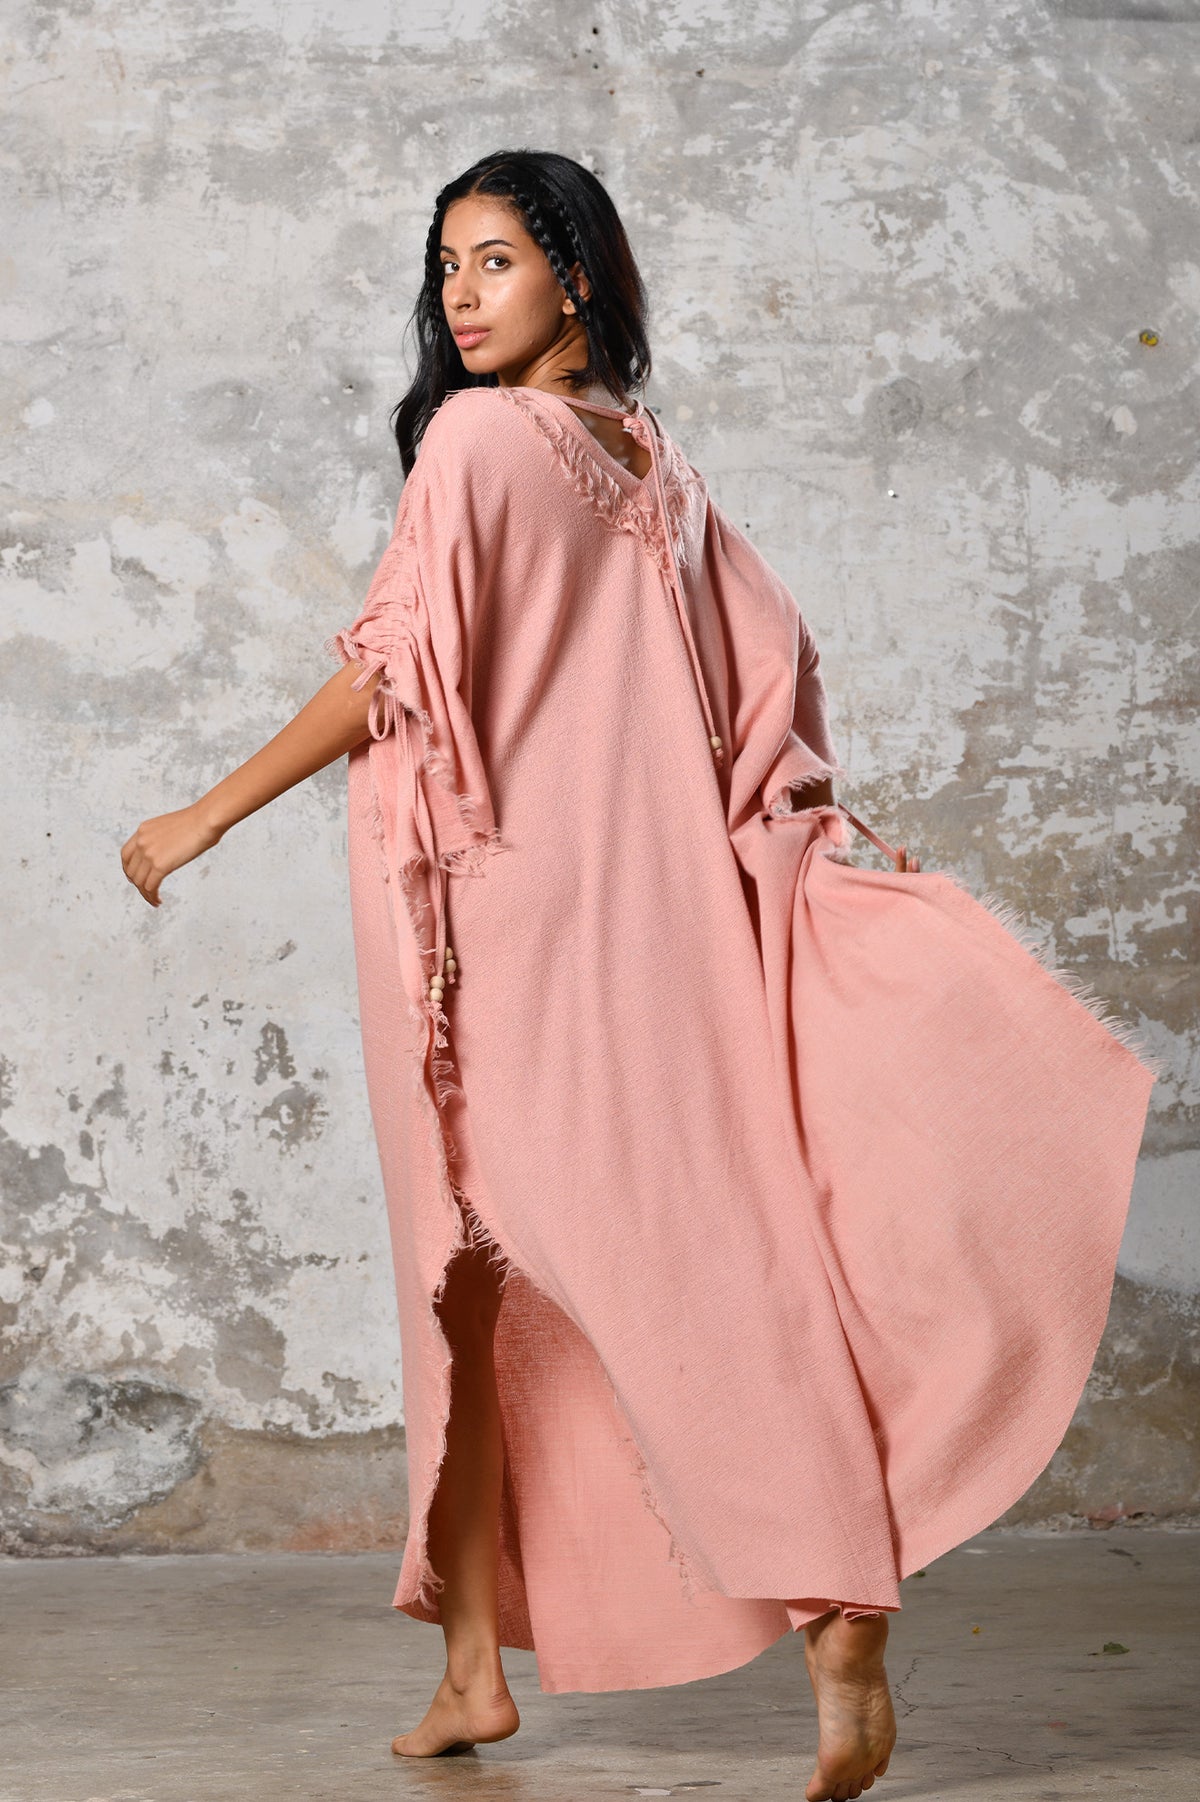 A versatile, pink earthy goddess dress that embodies boho-chic style. Crafted from the softest cotton fabric, this garment offers both comfort and a fashion statement. The dress can be worn in two distinct styles, either as a kaftan or a sultry dress, with a simple change in the way you put it on. Its natural and ethereal design exudes a warm, comforting feeling against your skin, making it a must-have addition to your wardrobe for those seeking a harmonious blend of style and comfort.